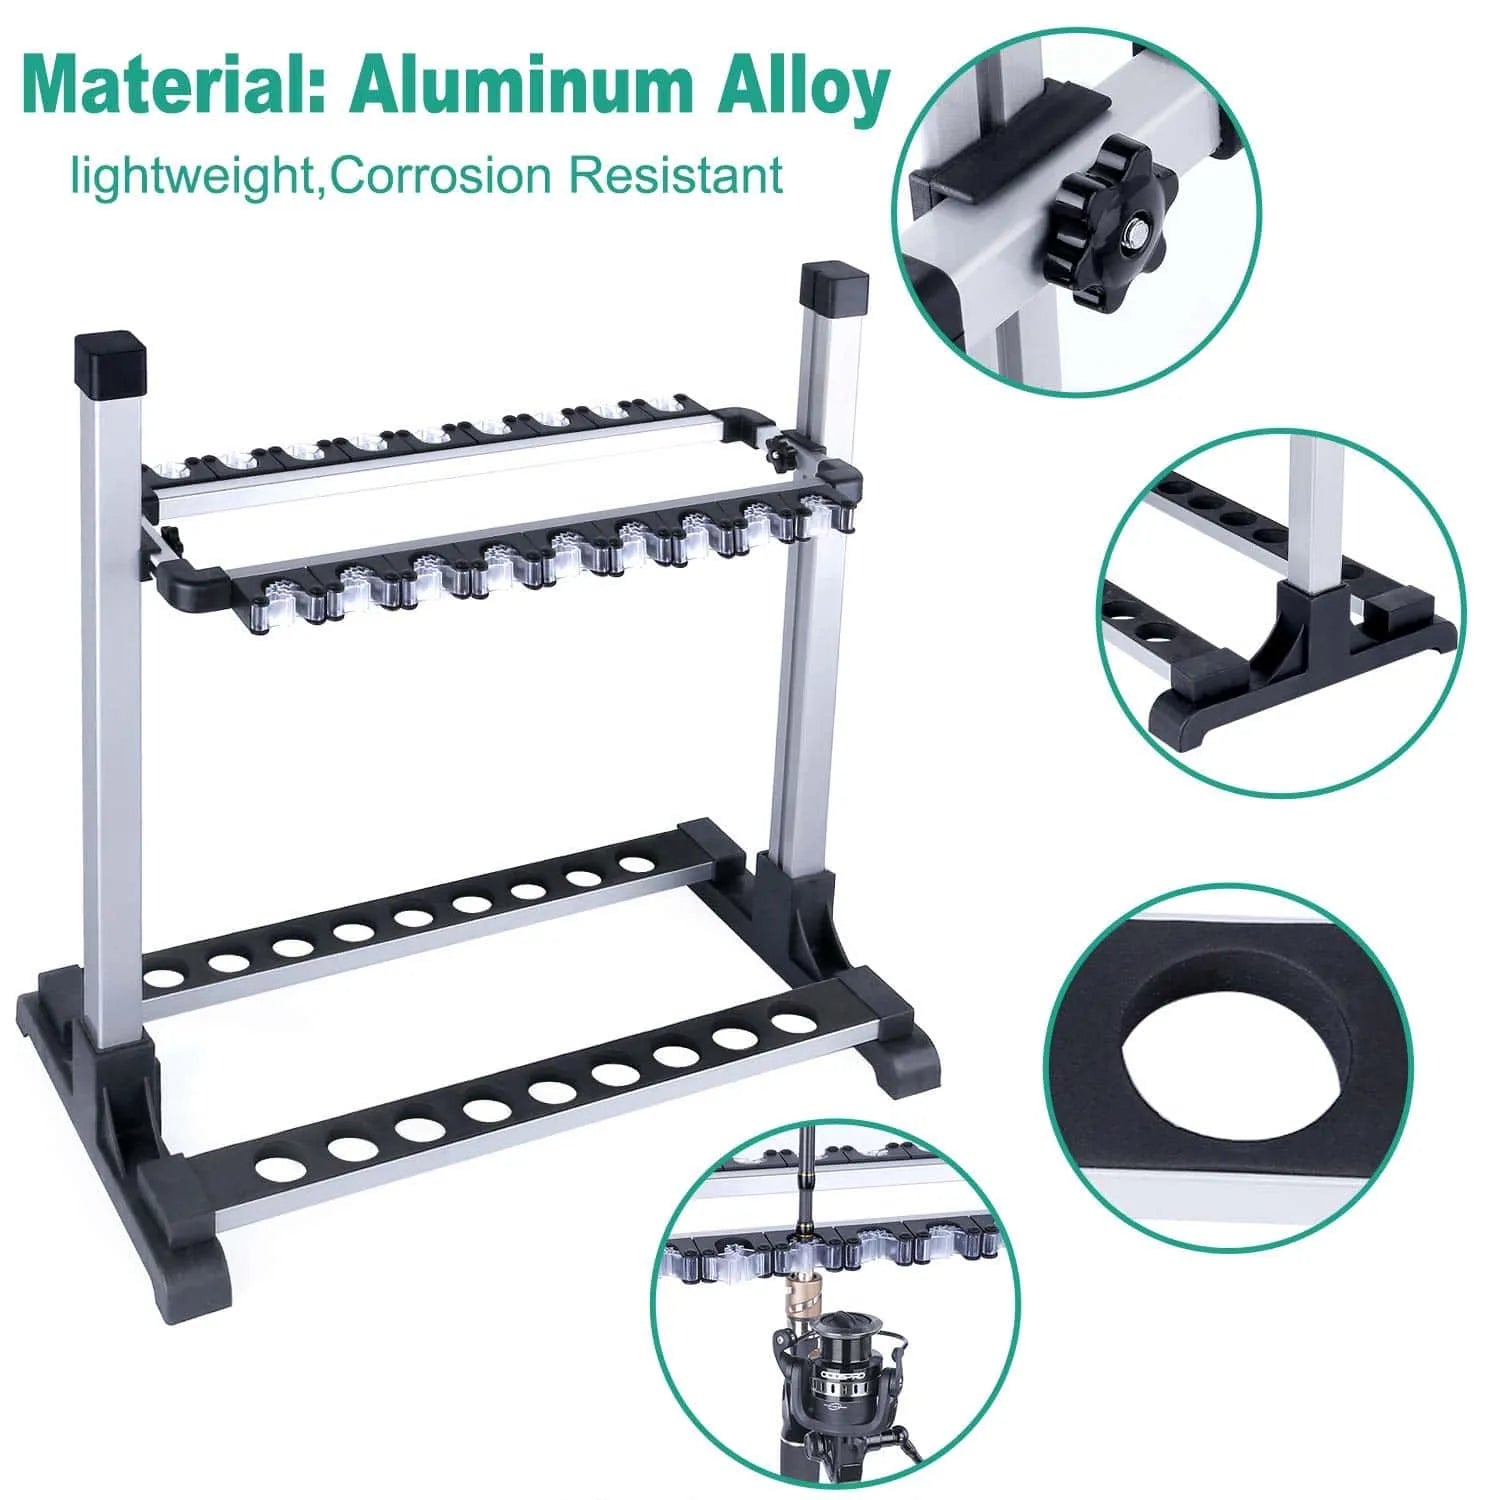 Fishing Rod Rack Metal Aluminum Alloy Fishing Rod Organizer Portable  Fishing Rod Holder Hold Up to 24 Rods for All Type Fishing Pole